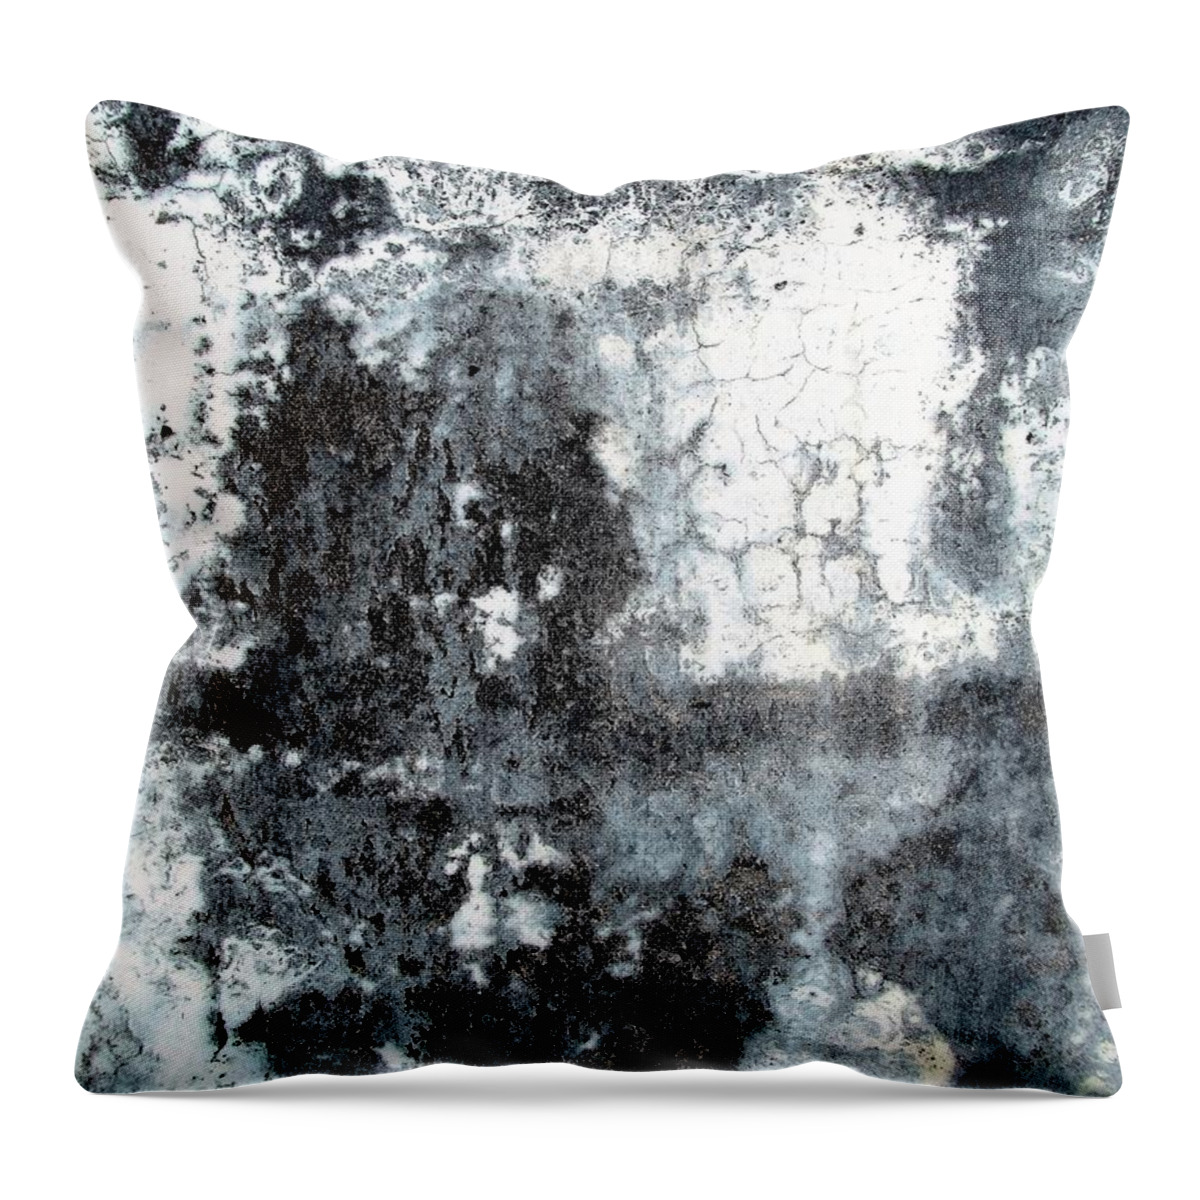 Texture Throw Pillow featuring the photograph Wall Abstract 165 by Maria Huntley